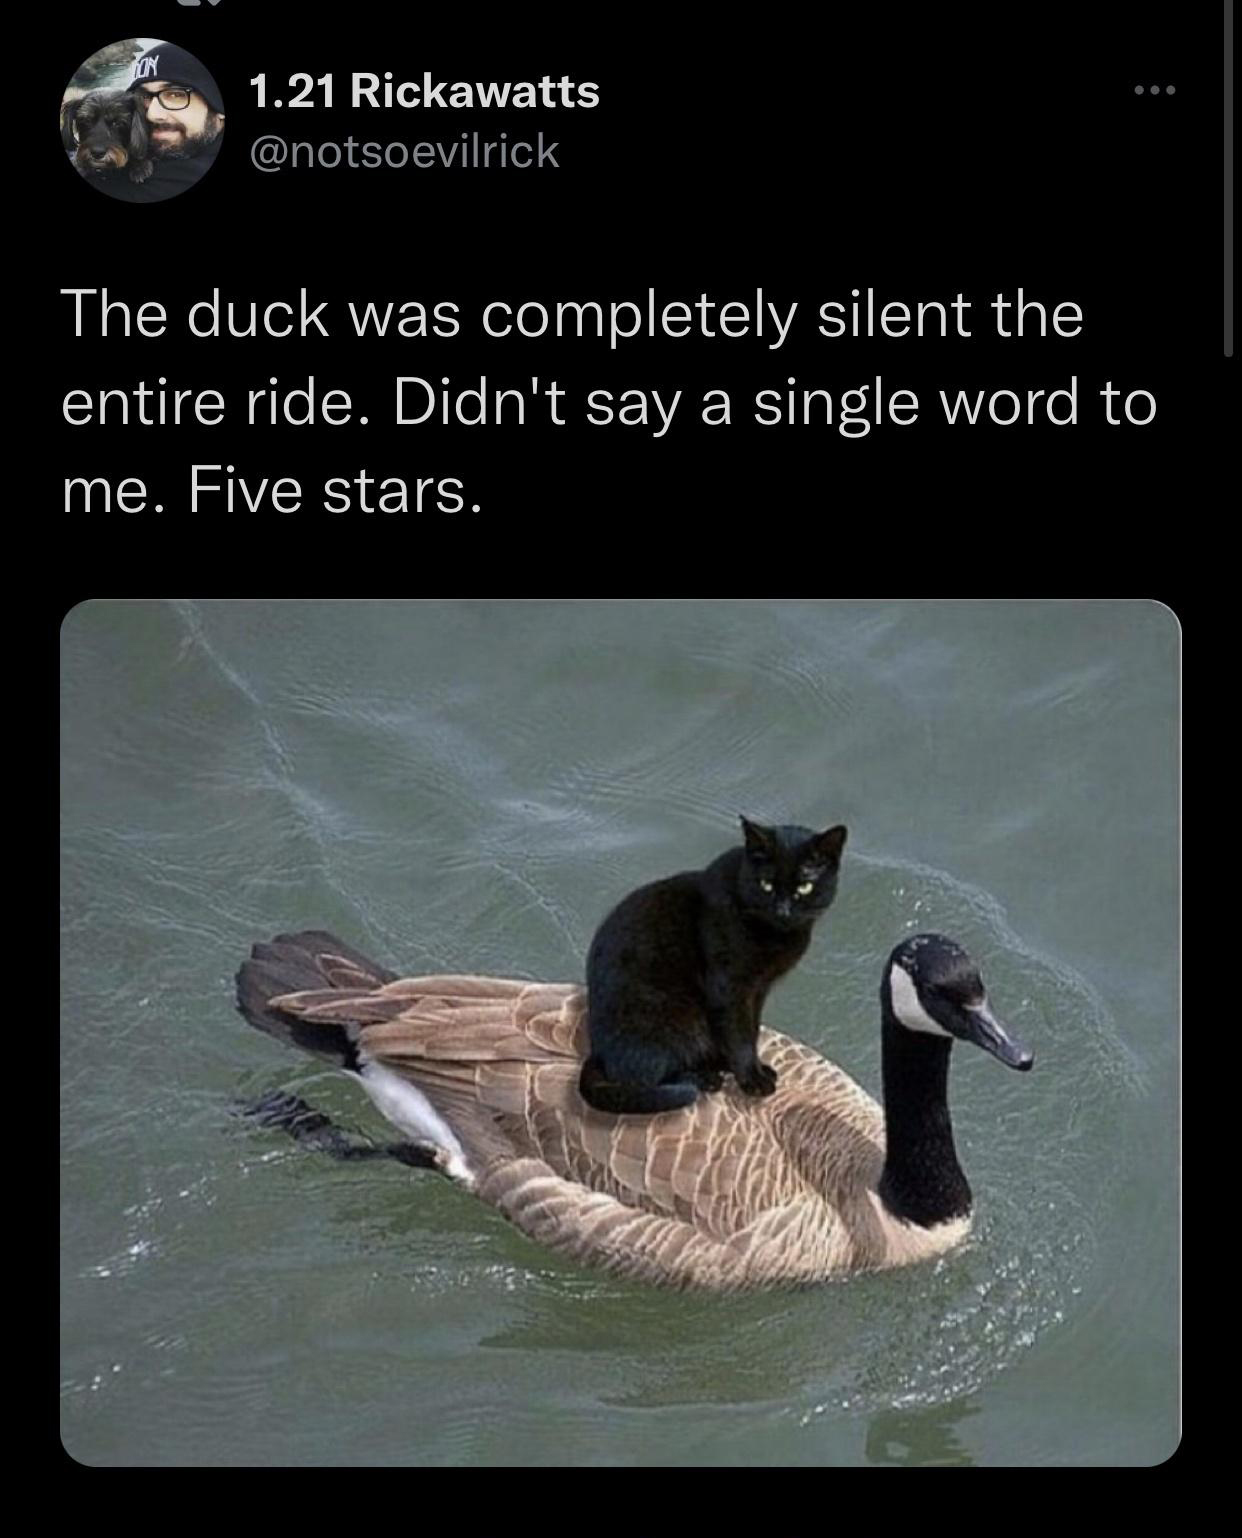 funny memes - hilarious memes - he attack he protect - In 1.21 Rickawatts The duck was completely silent the entire ride. Didn't say a single word to me. Five stars.